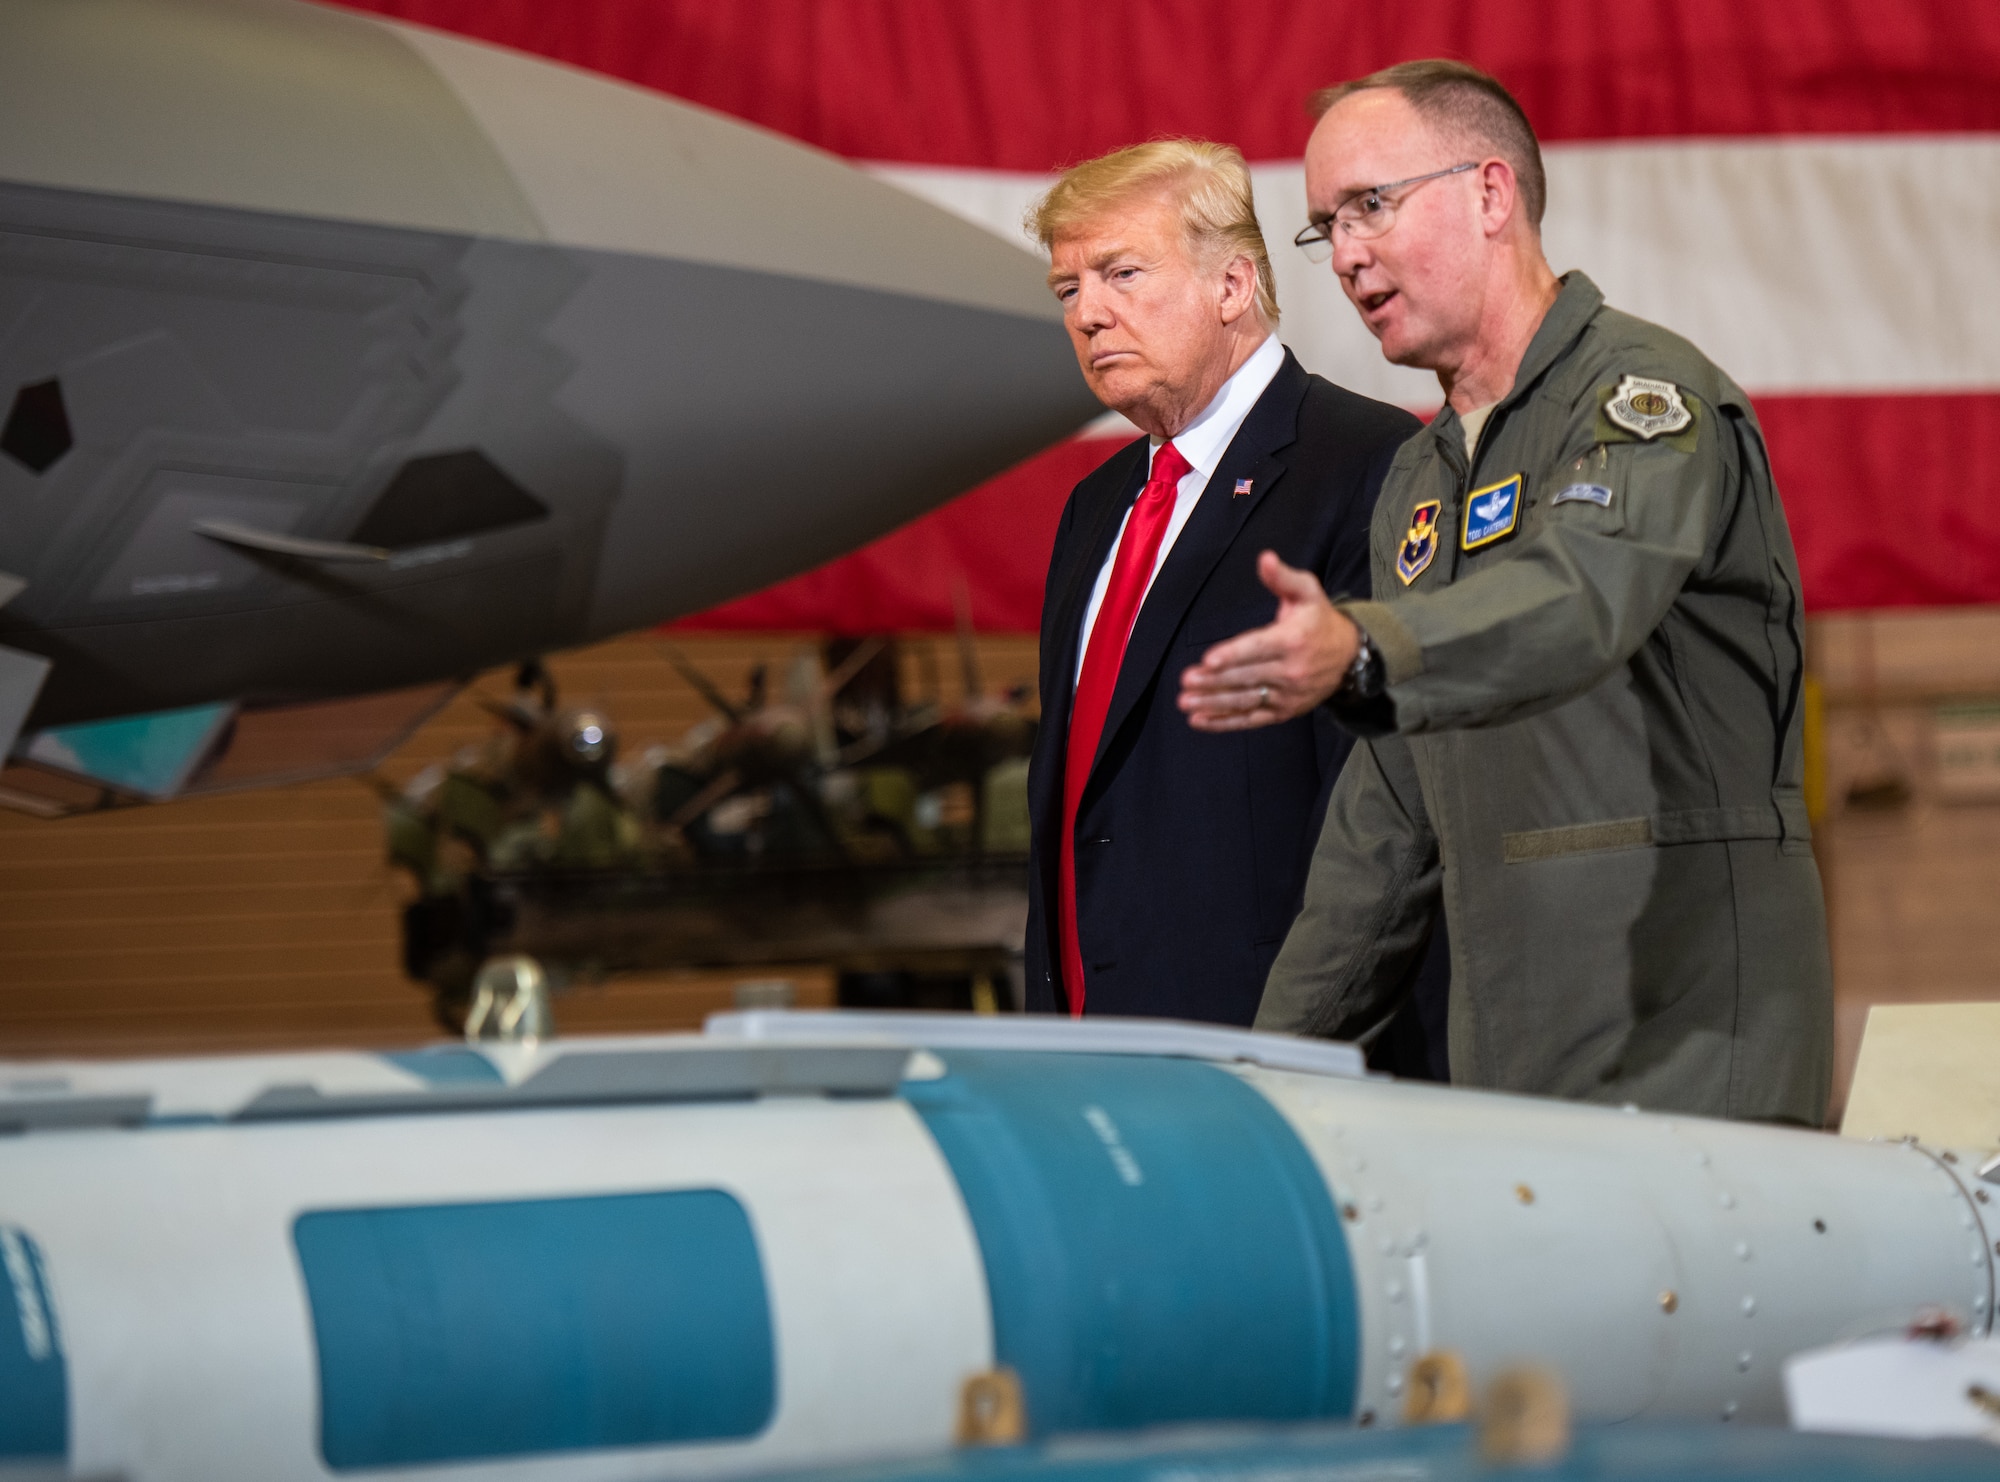 Brig Gen. Todd Canterbury, 56th Fighter Wing commander briefs President Donald J. Trump about the capabilities of the GBU-12 bomb during his visit to Luke Air Force Base, Ariz., Oct. 19, 2018. After touring a static display of the F-35A Lightning II and other military equipment, Trump met with cabinet members, congressmen, and defense industry leaders in a roundtable discussion on current defense issues including cybersecurity, stealth technology, and F-35 development. (U.S. Air Force photo by Senior Airman Alexander Cook)